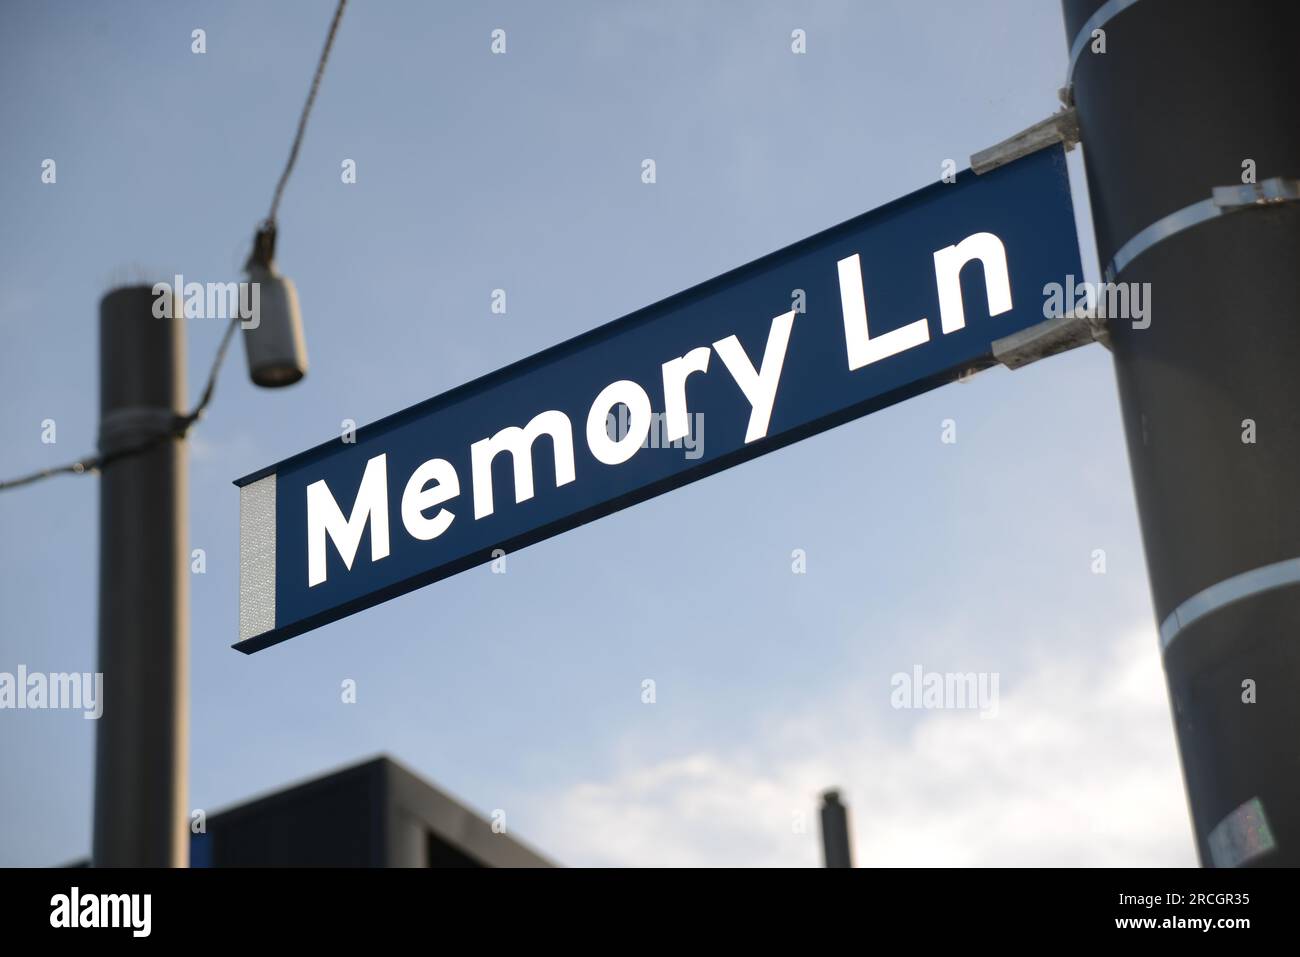 A street sign for Memory Lane in Christchurch, New Zealand Stock Photo